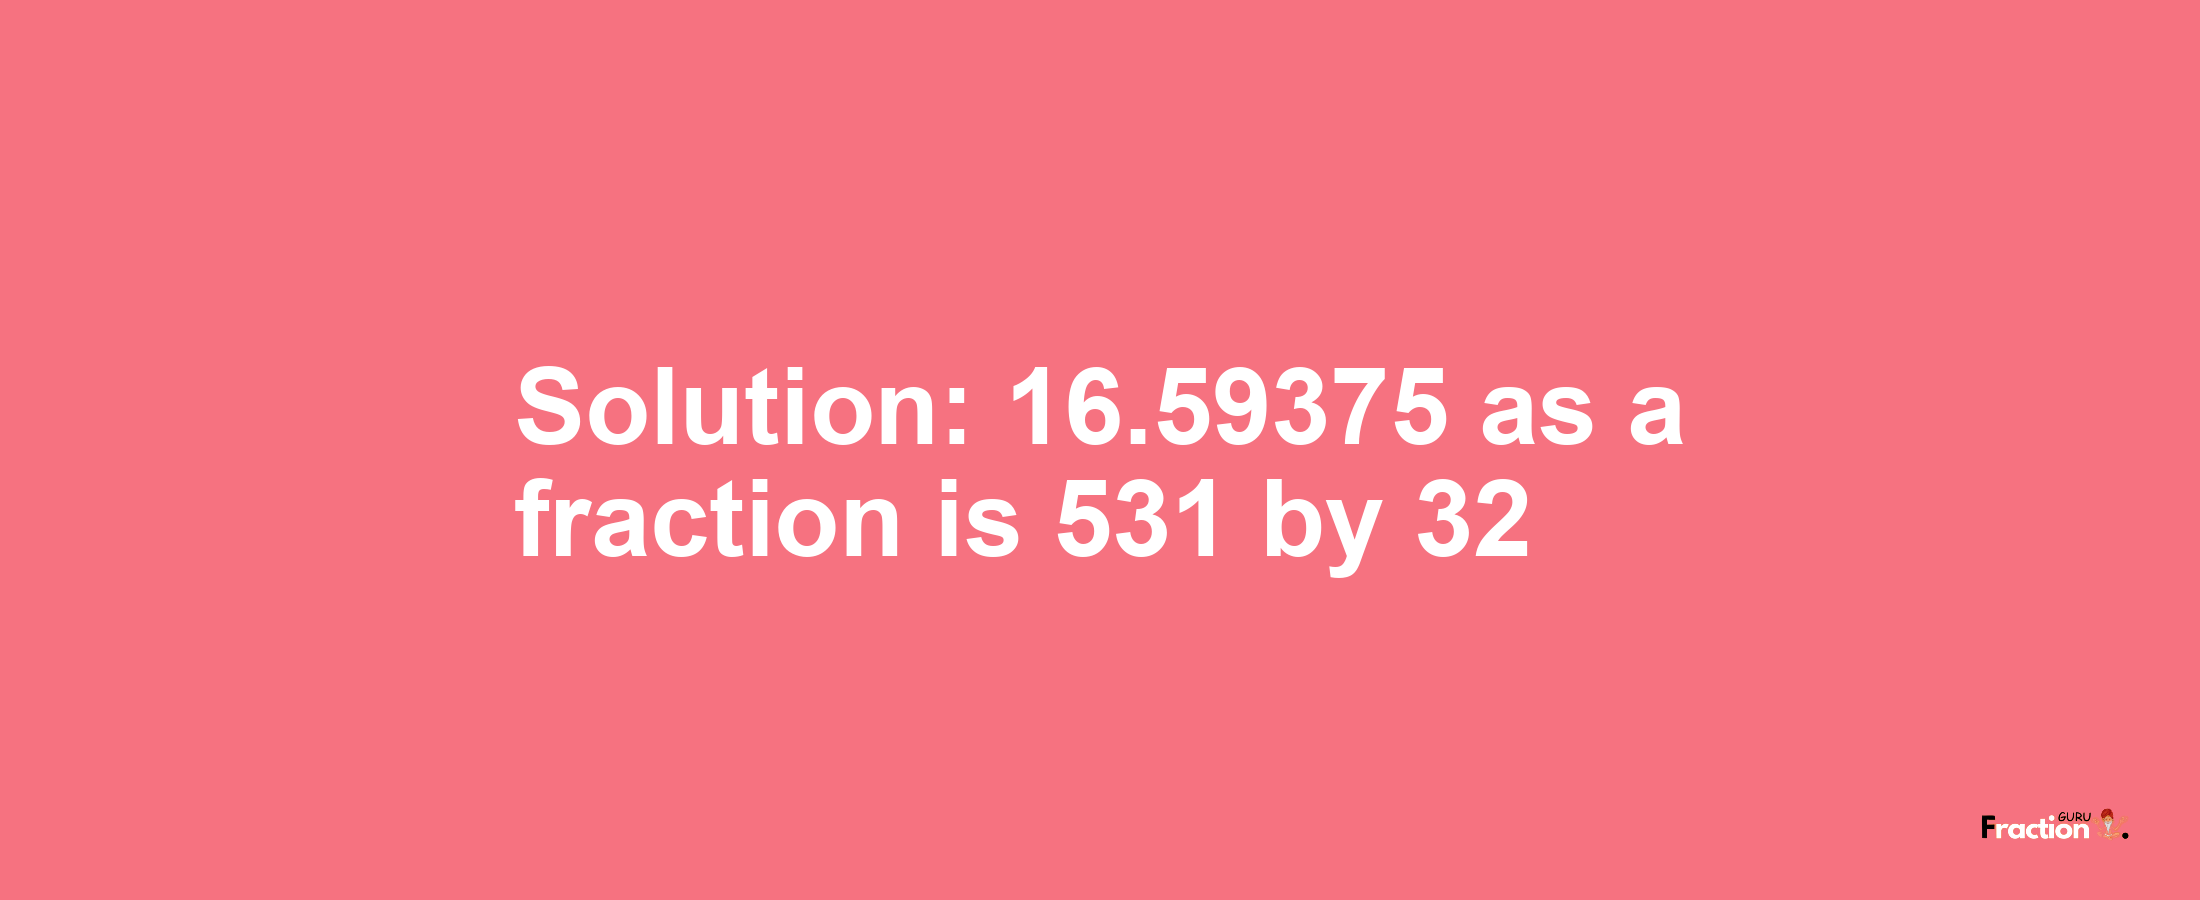 Solution:16.59375 as a fraction is 531/32